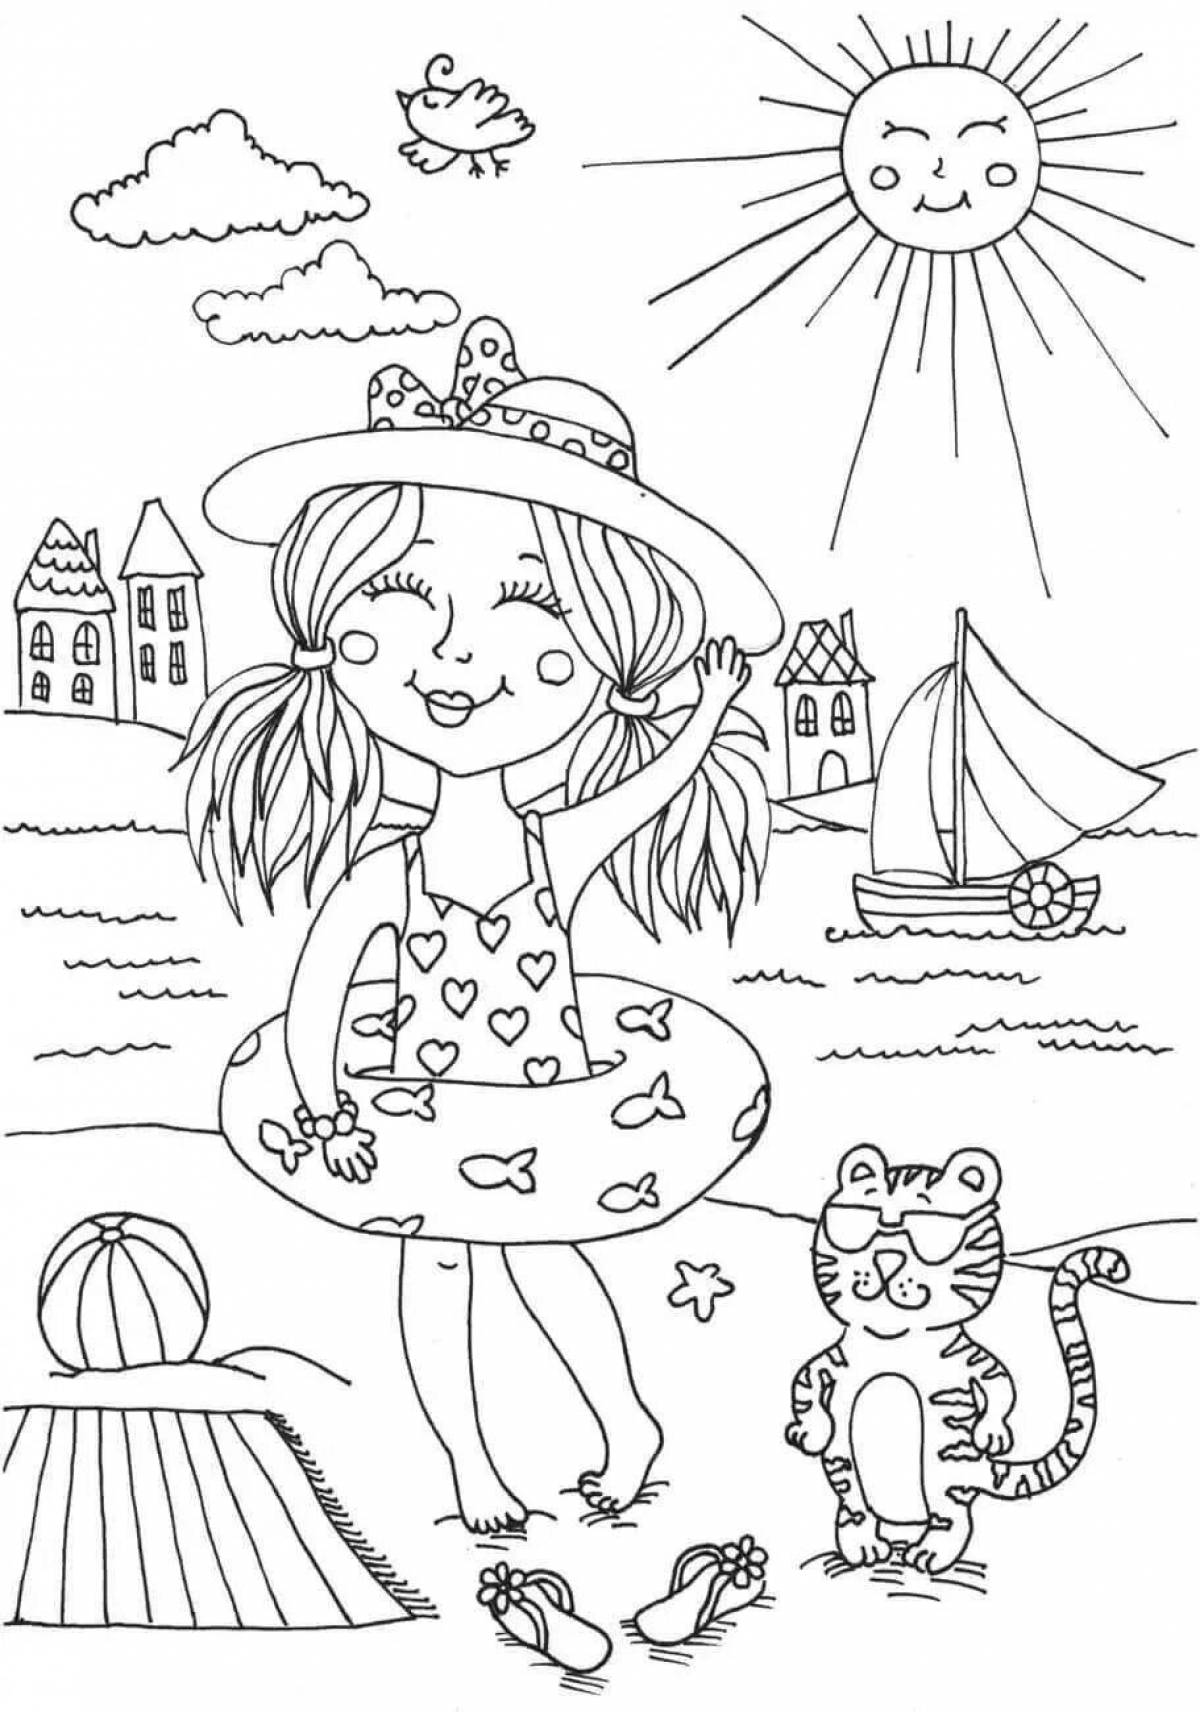 Shiny summer coloring book